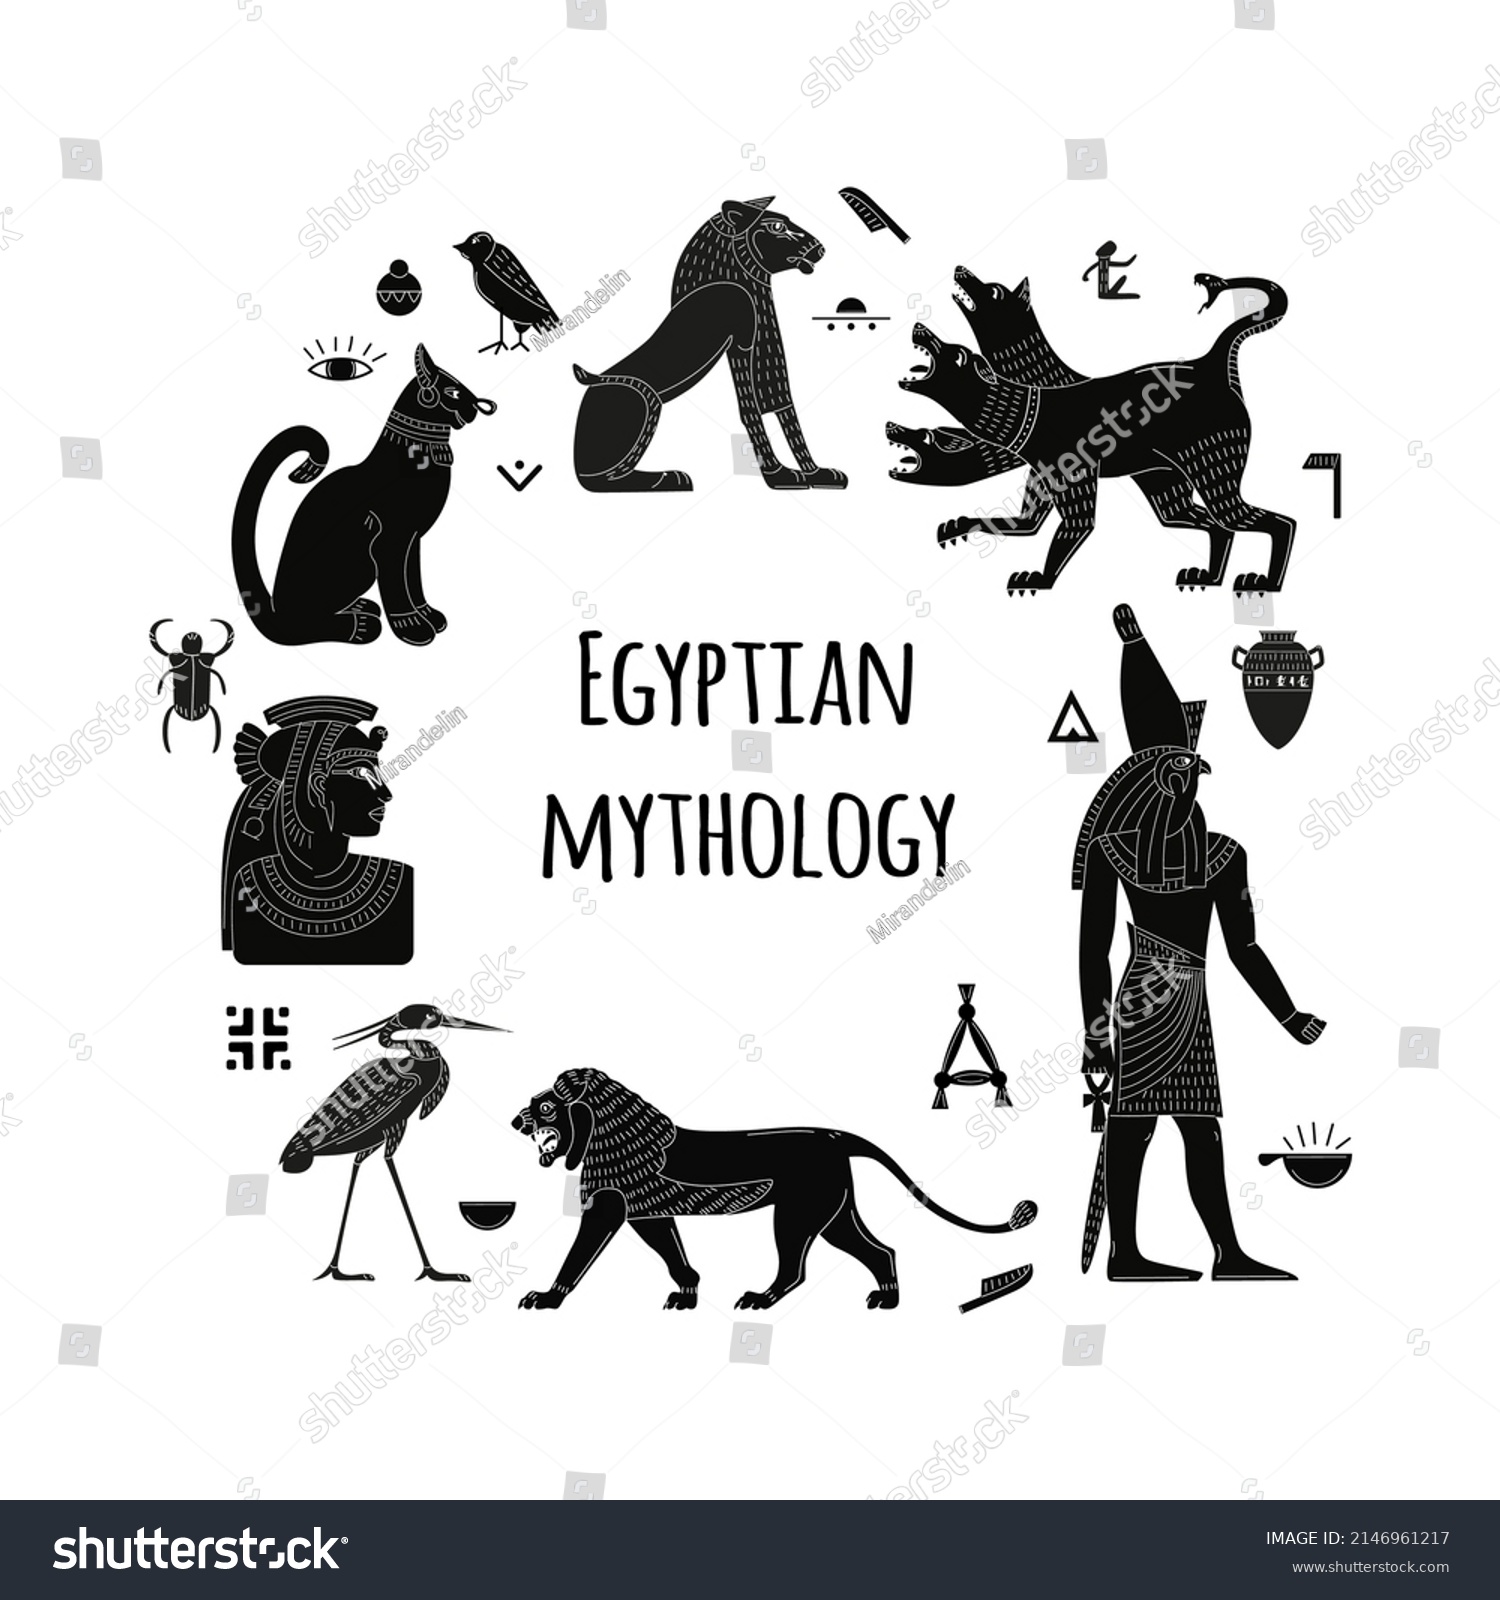 SVG of Egyptian mythological animals. Ancient gods and creatures. Lion, Cerberus, Egyptian writing and symbols. A set of flat elements. svg